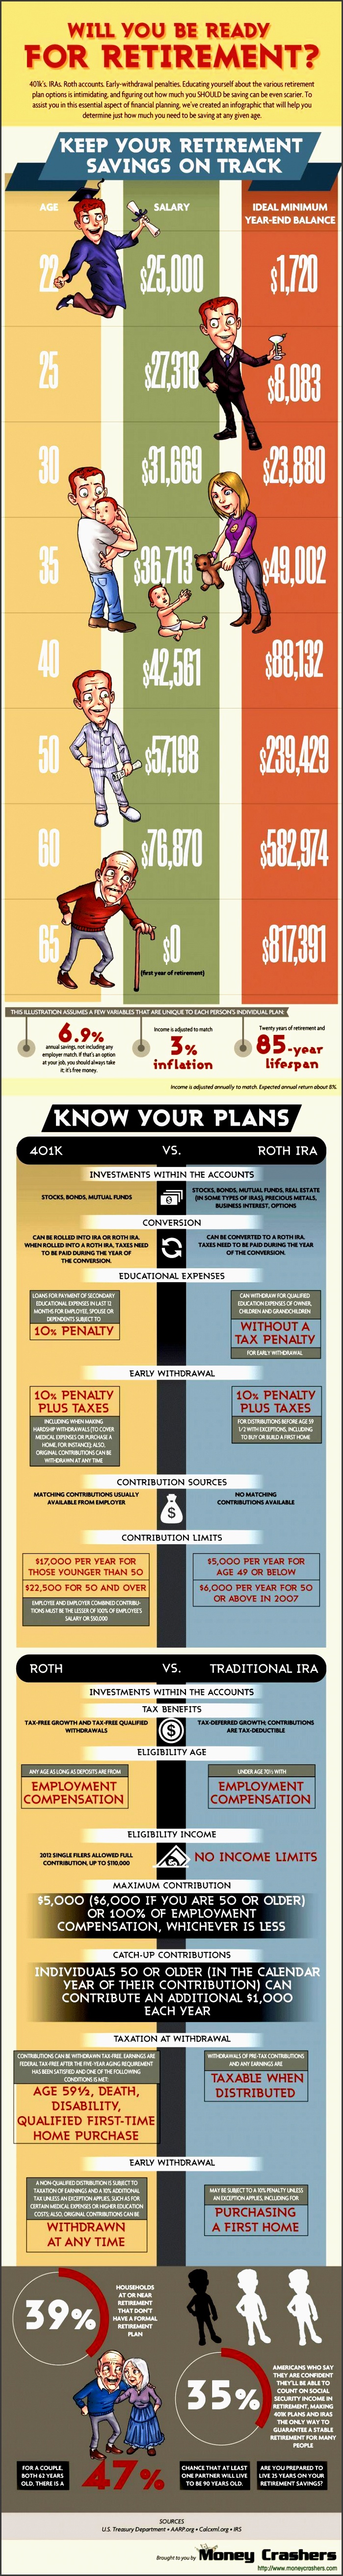 finance infographic will you be ready for retirement 401k ira roth